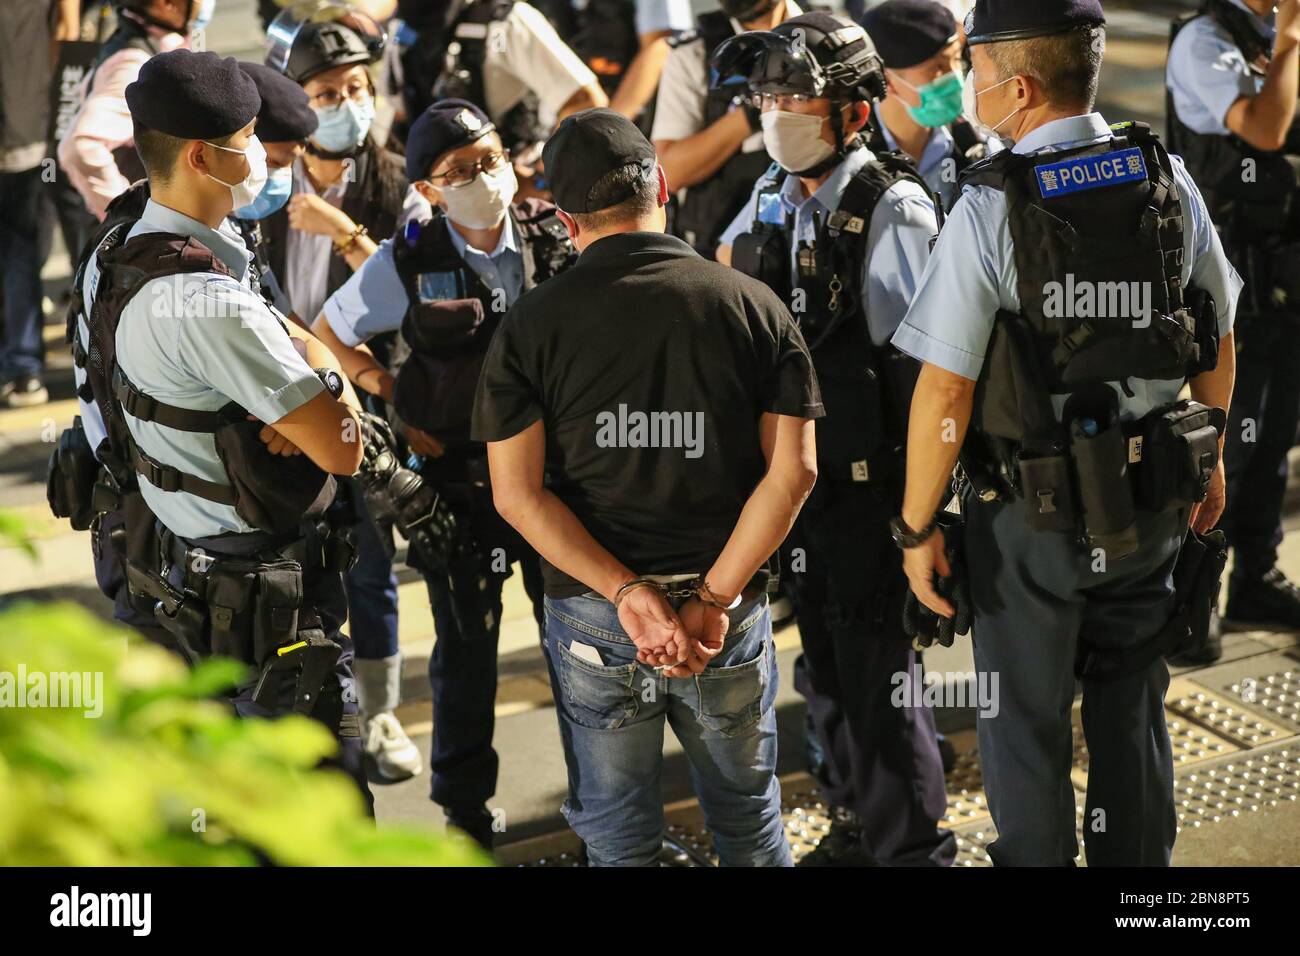 A protester being arrested and handcuffed by the police during the protest.Pro-democracy protesters gather in different shopping malls on 13 May 2020, the day of Hong Kong chief executive Carrie Lam birthday. They demand investigation for the brutality actions carried out to the protesters by the Hong Kong police during last year's protests triggered by the extradition bill. Stock Photo